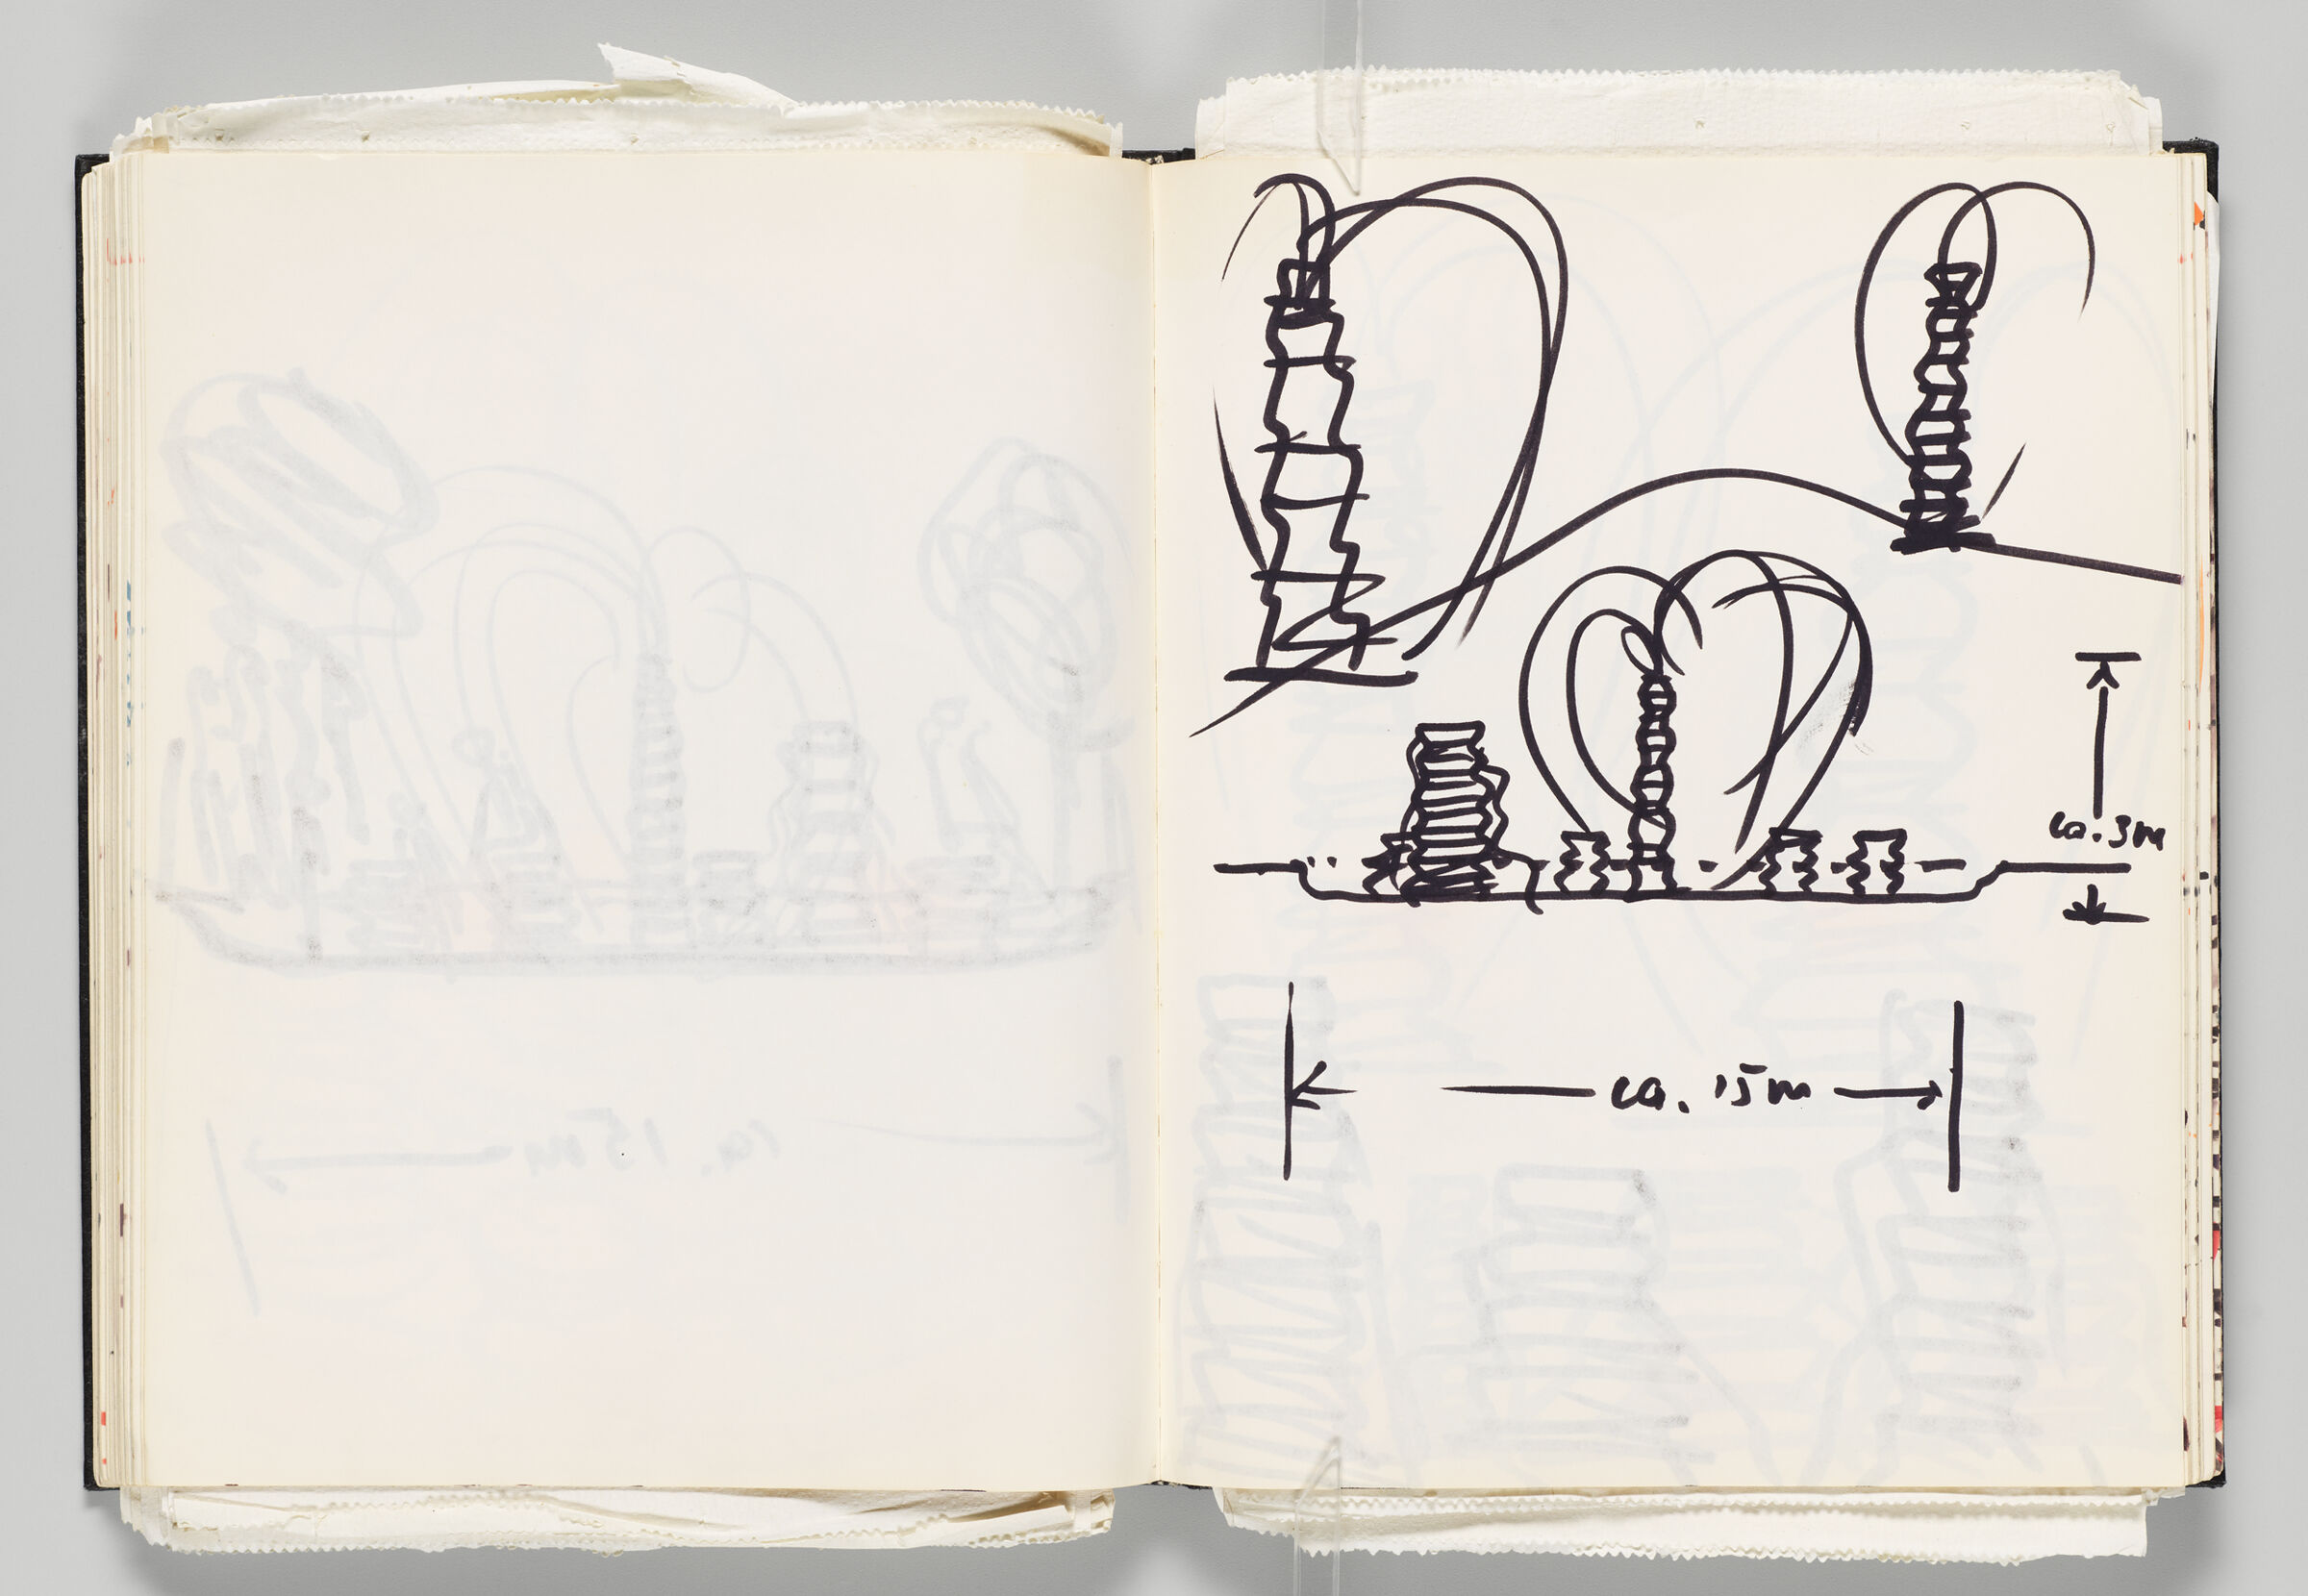 Untitled (Bleed-Through Of Previous Page, Left Page); Untitled (Fountain Designs With Scale, Right Page)